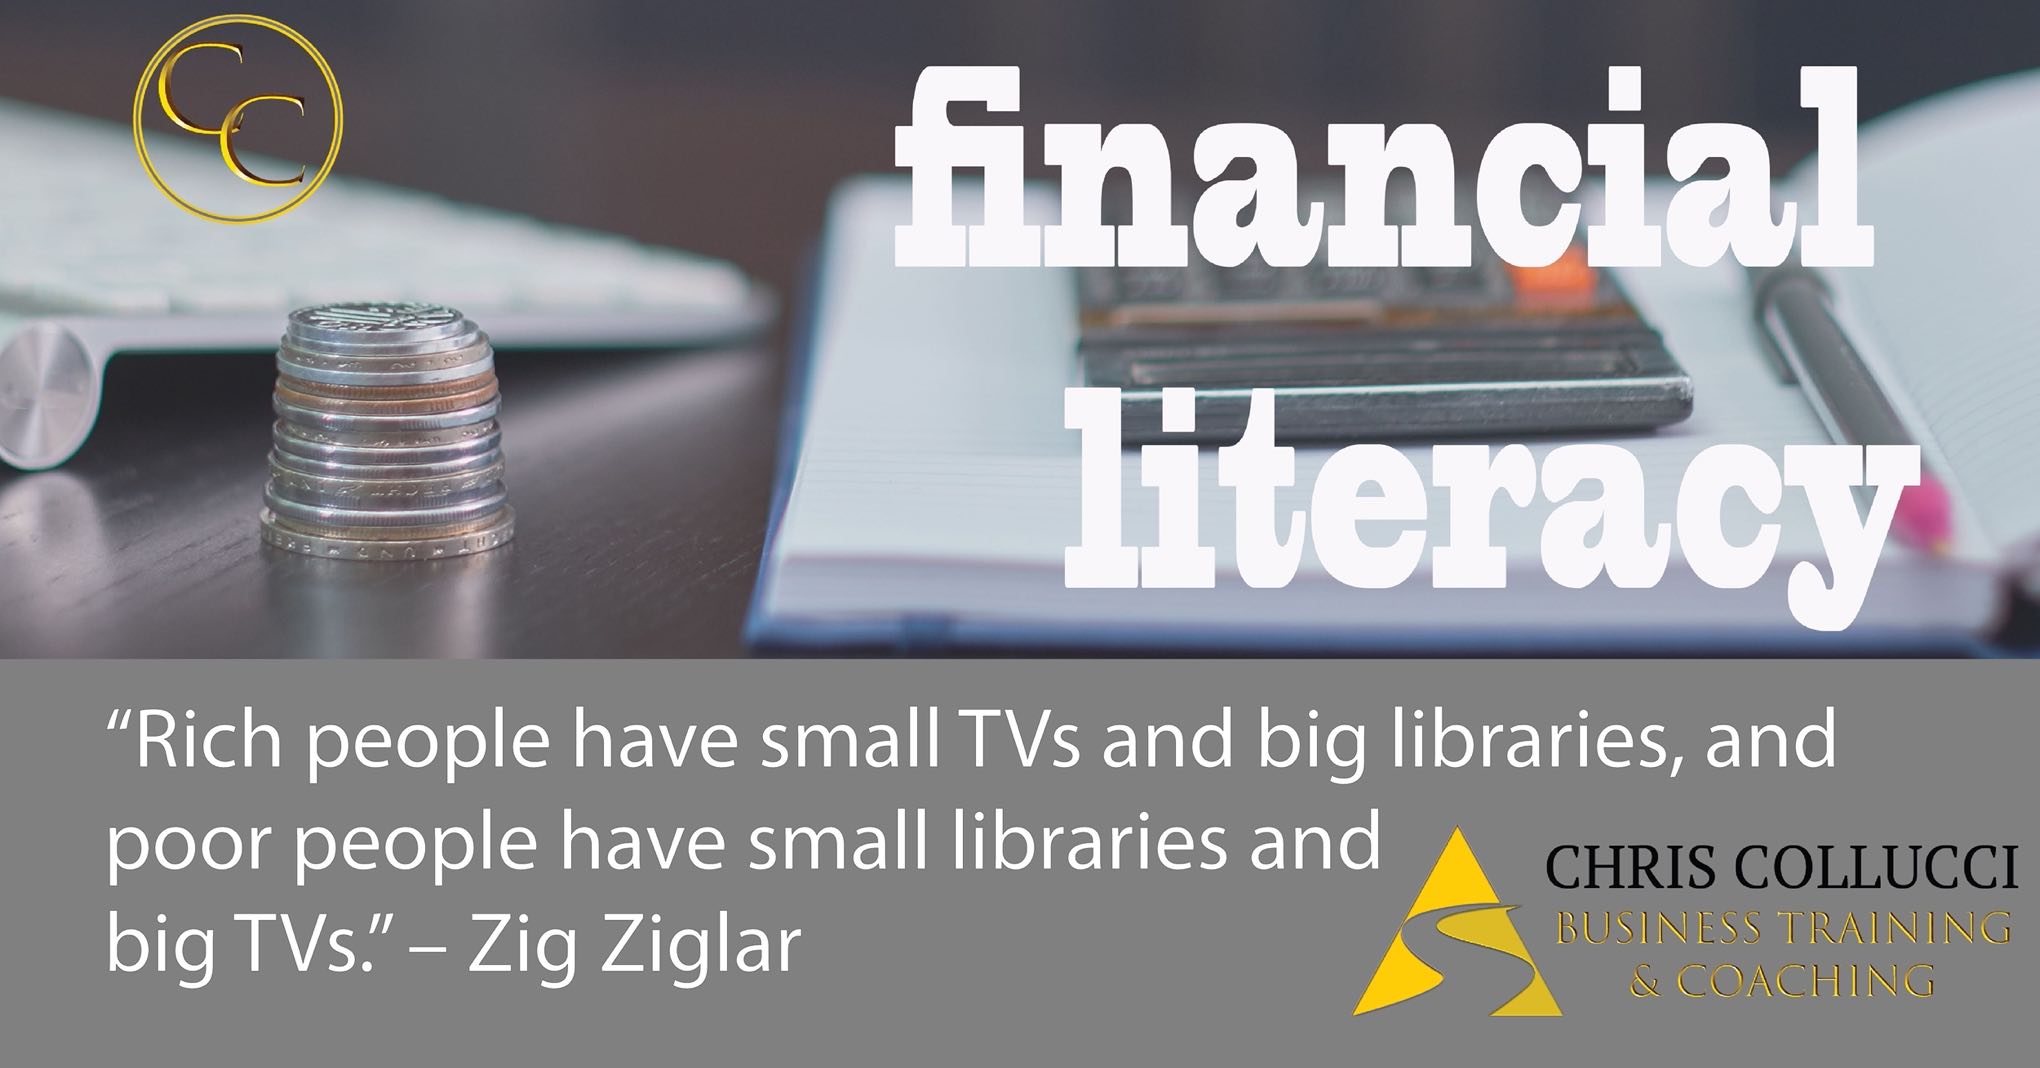 motivational quote from Zig Ziglar reading "Rich people have small TV's and big libraries, and poor people have small libraries and big TV's" - Zig Ziglar